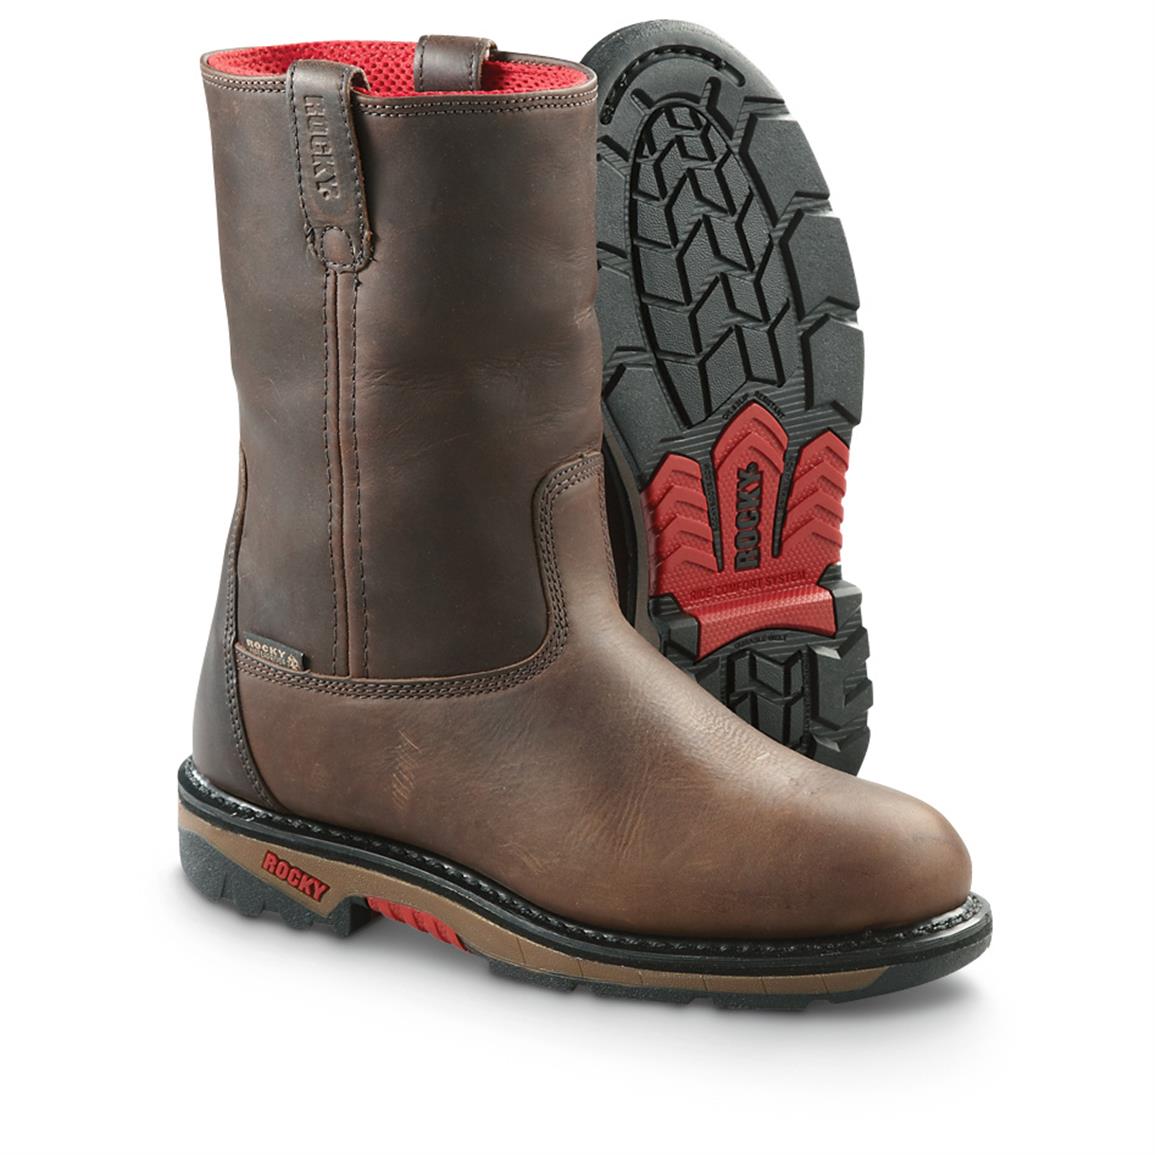 Rocky Ride 10" Waterproof Pullon Work Boots 618685, Work Boots at Sportsman's Guide